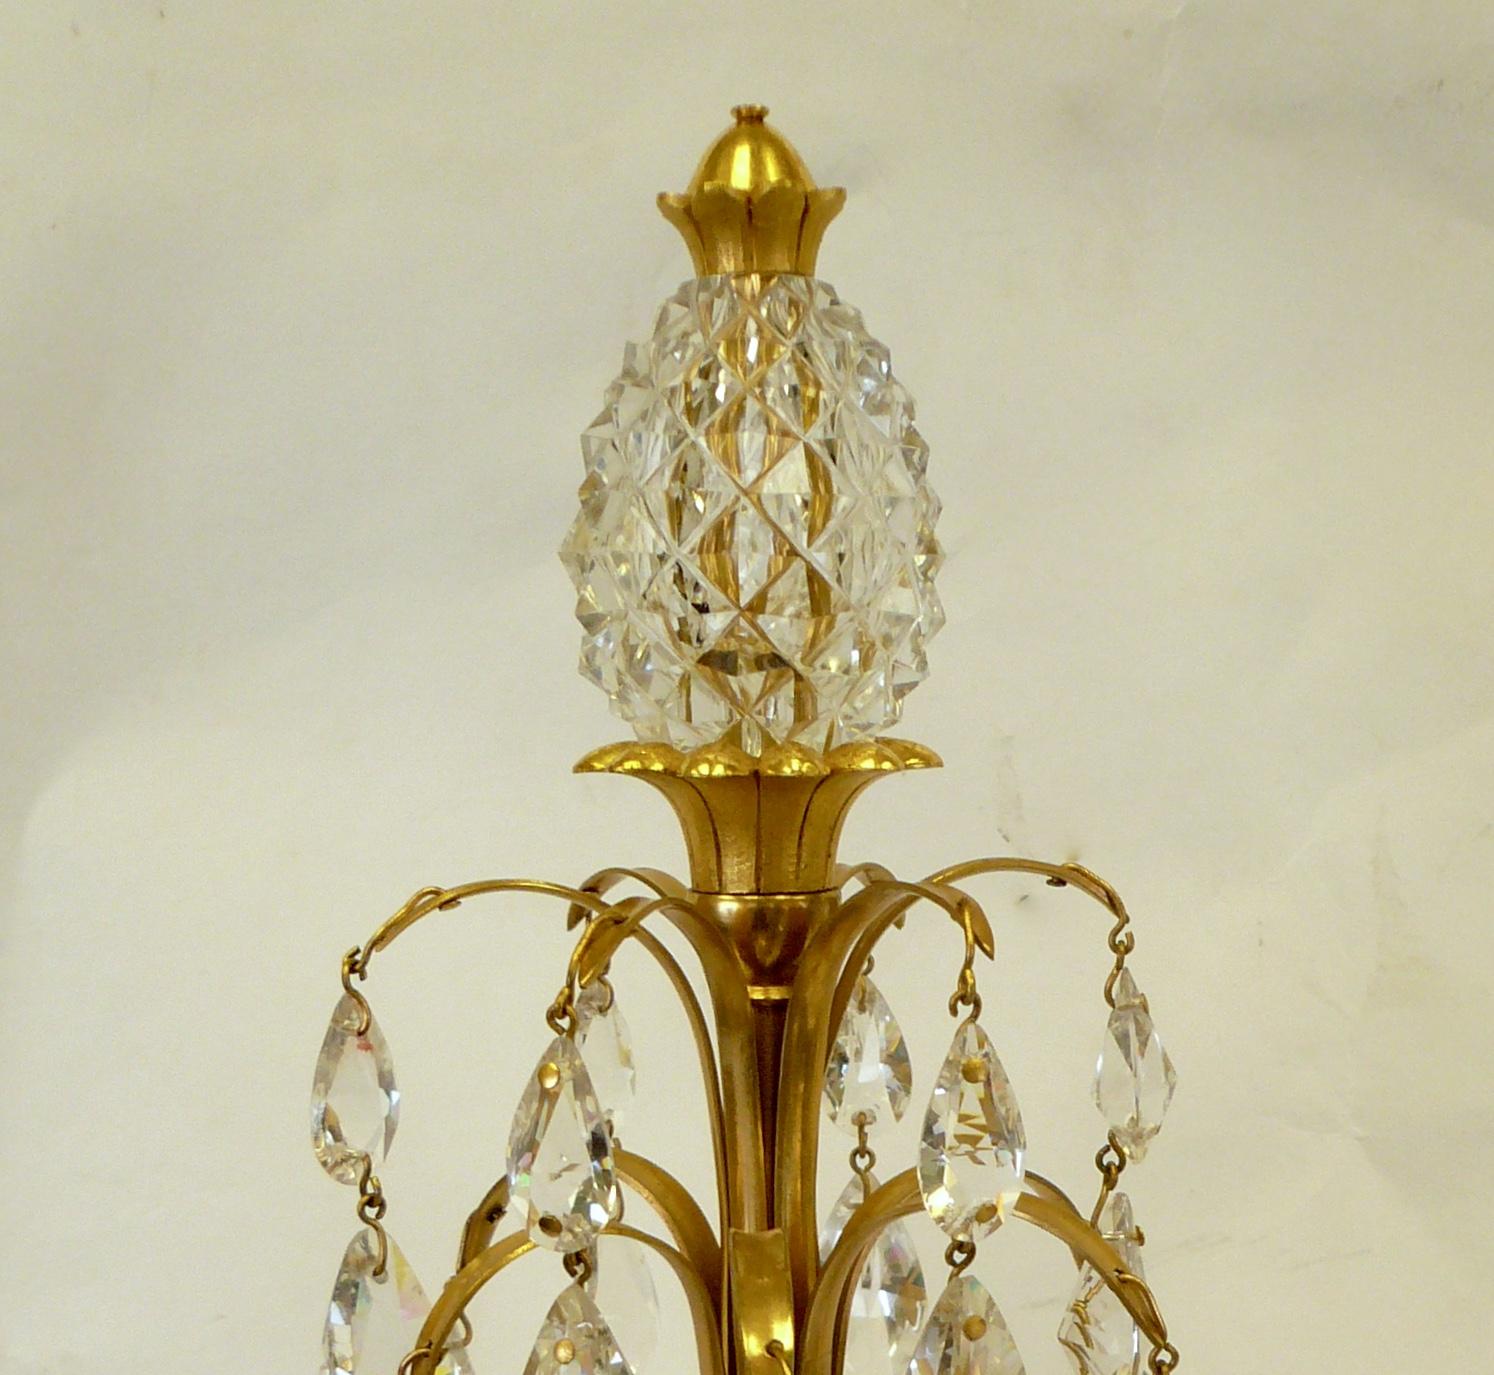 Exquisite Pair of Georgian Sconces in the Adam Style, Attributed to Wm. Parker For Sale 1